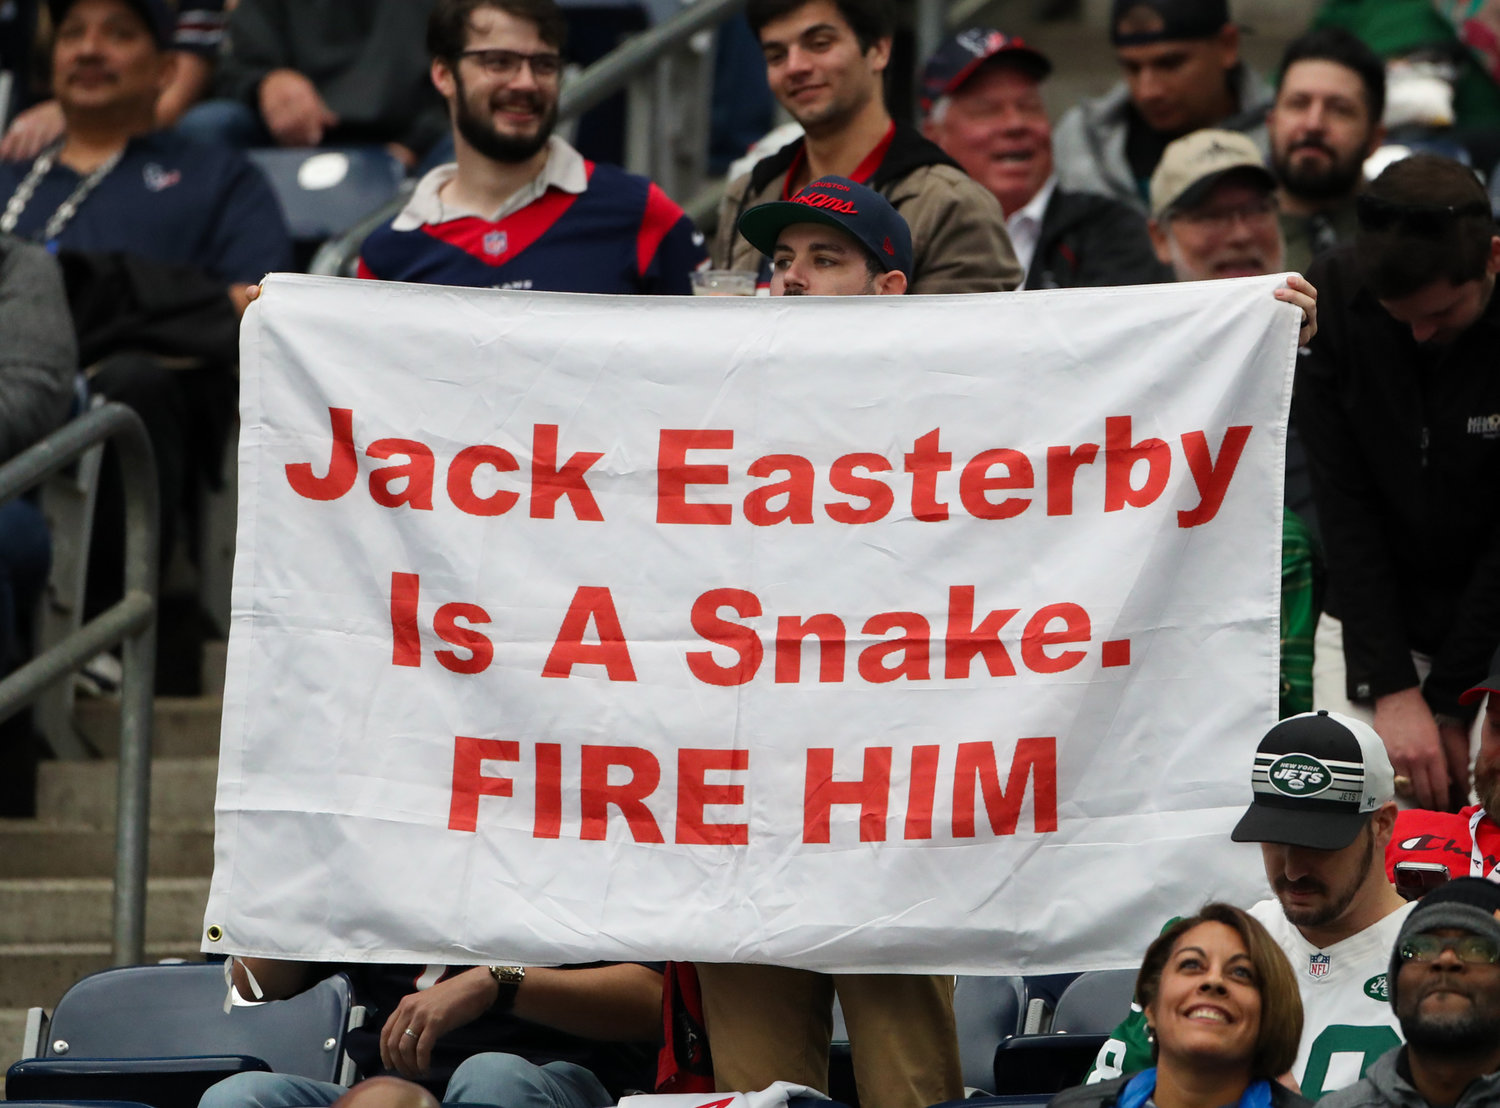 A Houston Texans fan holds up a sign about controversial Texans Executive Vice President of Operations Jack Easterby during an NFL game between the Houston Texans and the New York Jets on November 28, 2021 in Houston, Texas. The Jets won, 21-14